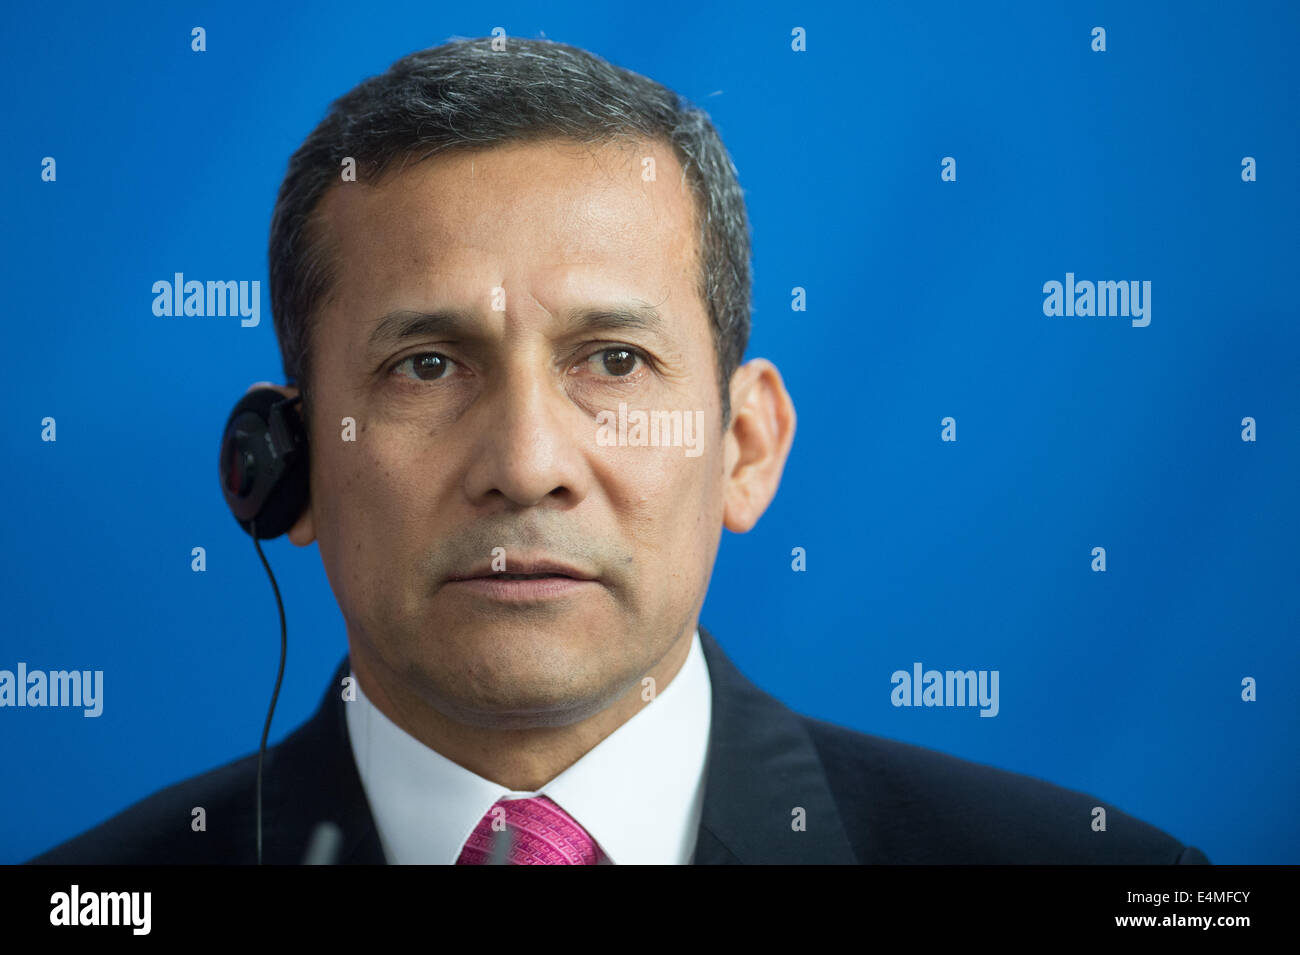 Berlin, Germany. 14th July, 2014. Peruvian President Ollanta Humala Tasso attends a press conference at the German chancellery in Berlin, Germany, 14 July 2014. Tasso is on a state visit in Germany. Photo: Maurizio Gambarini/dpa/Alamy Live News Stock Photo